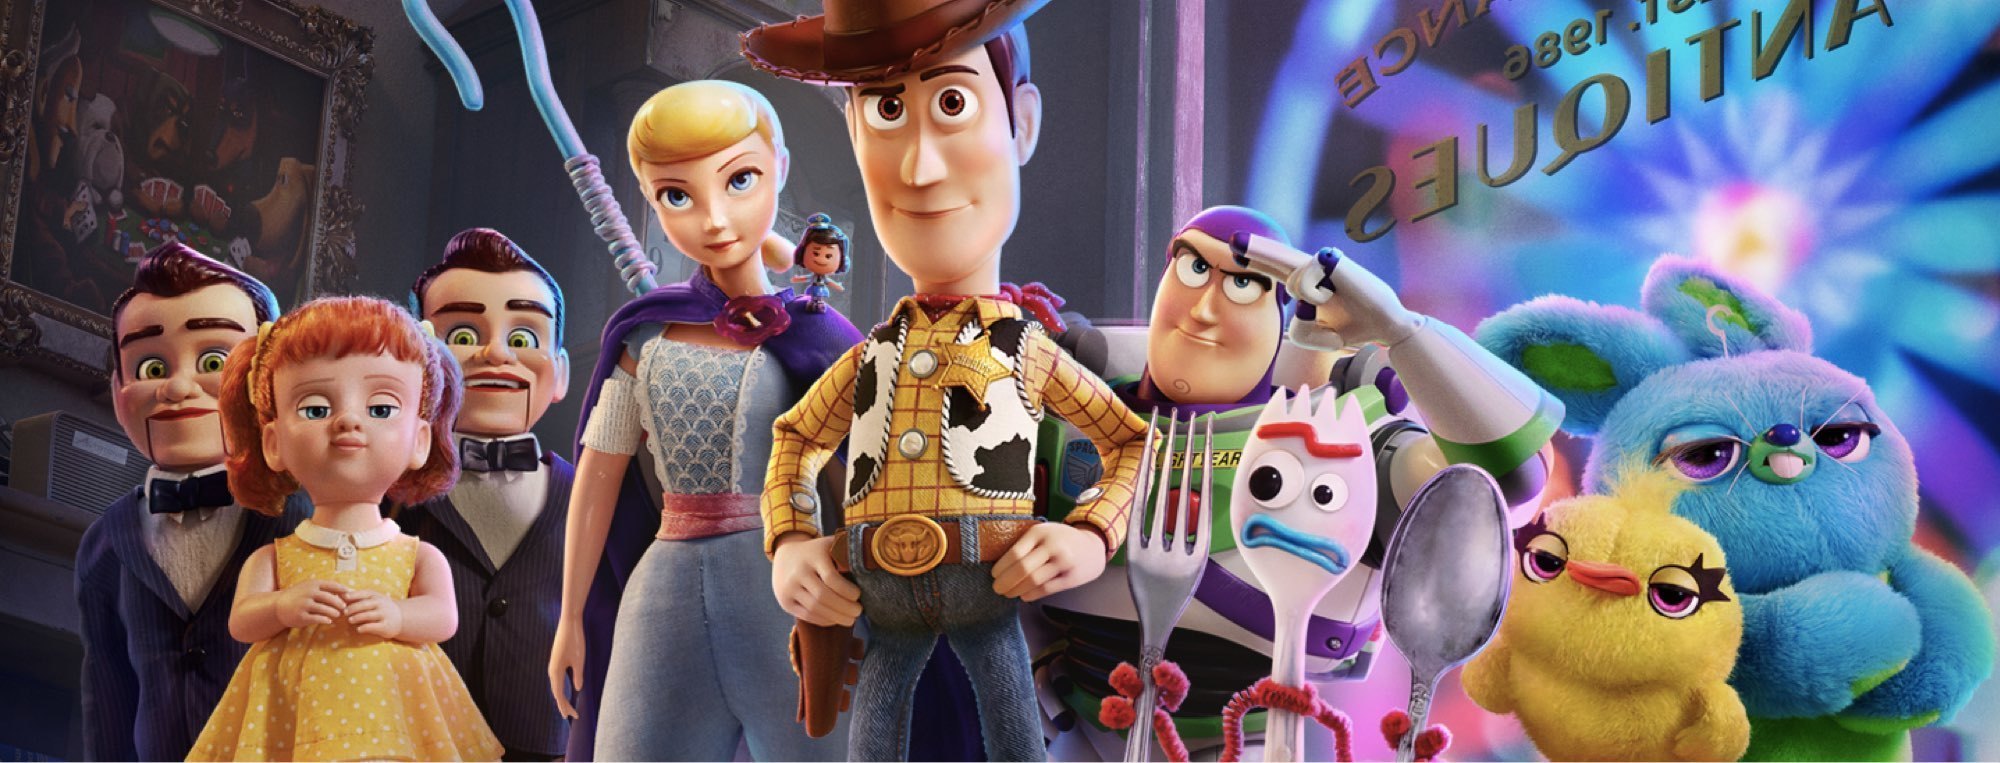 Toy Story 4 - Conhece as personagens